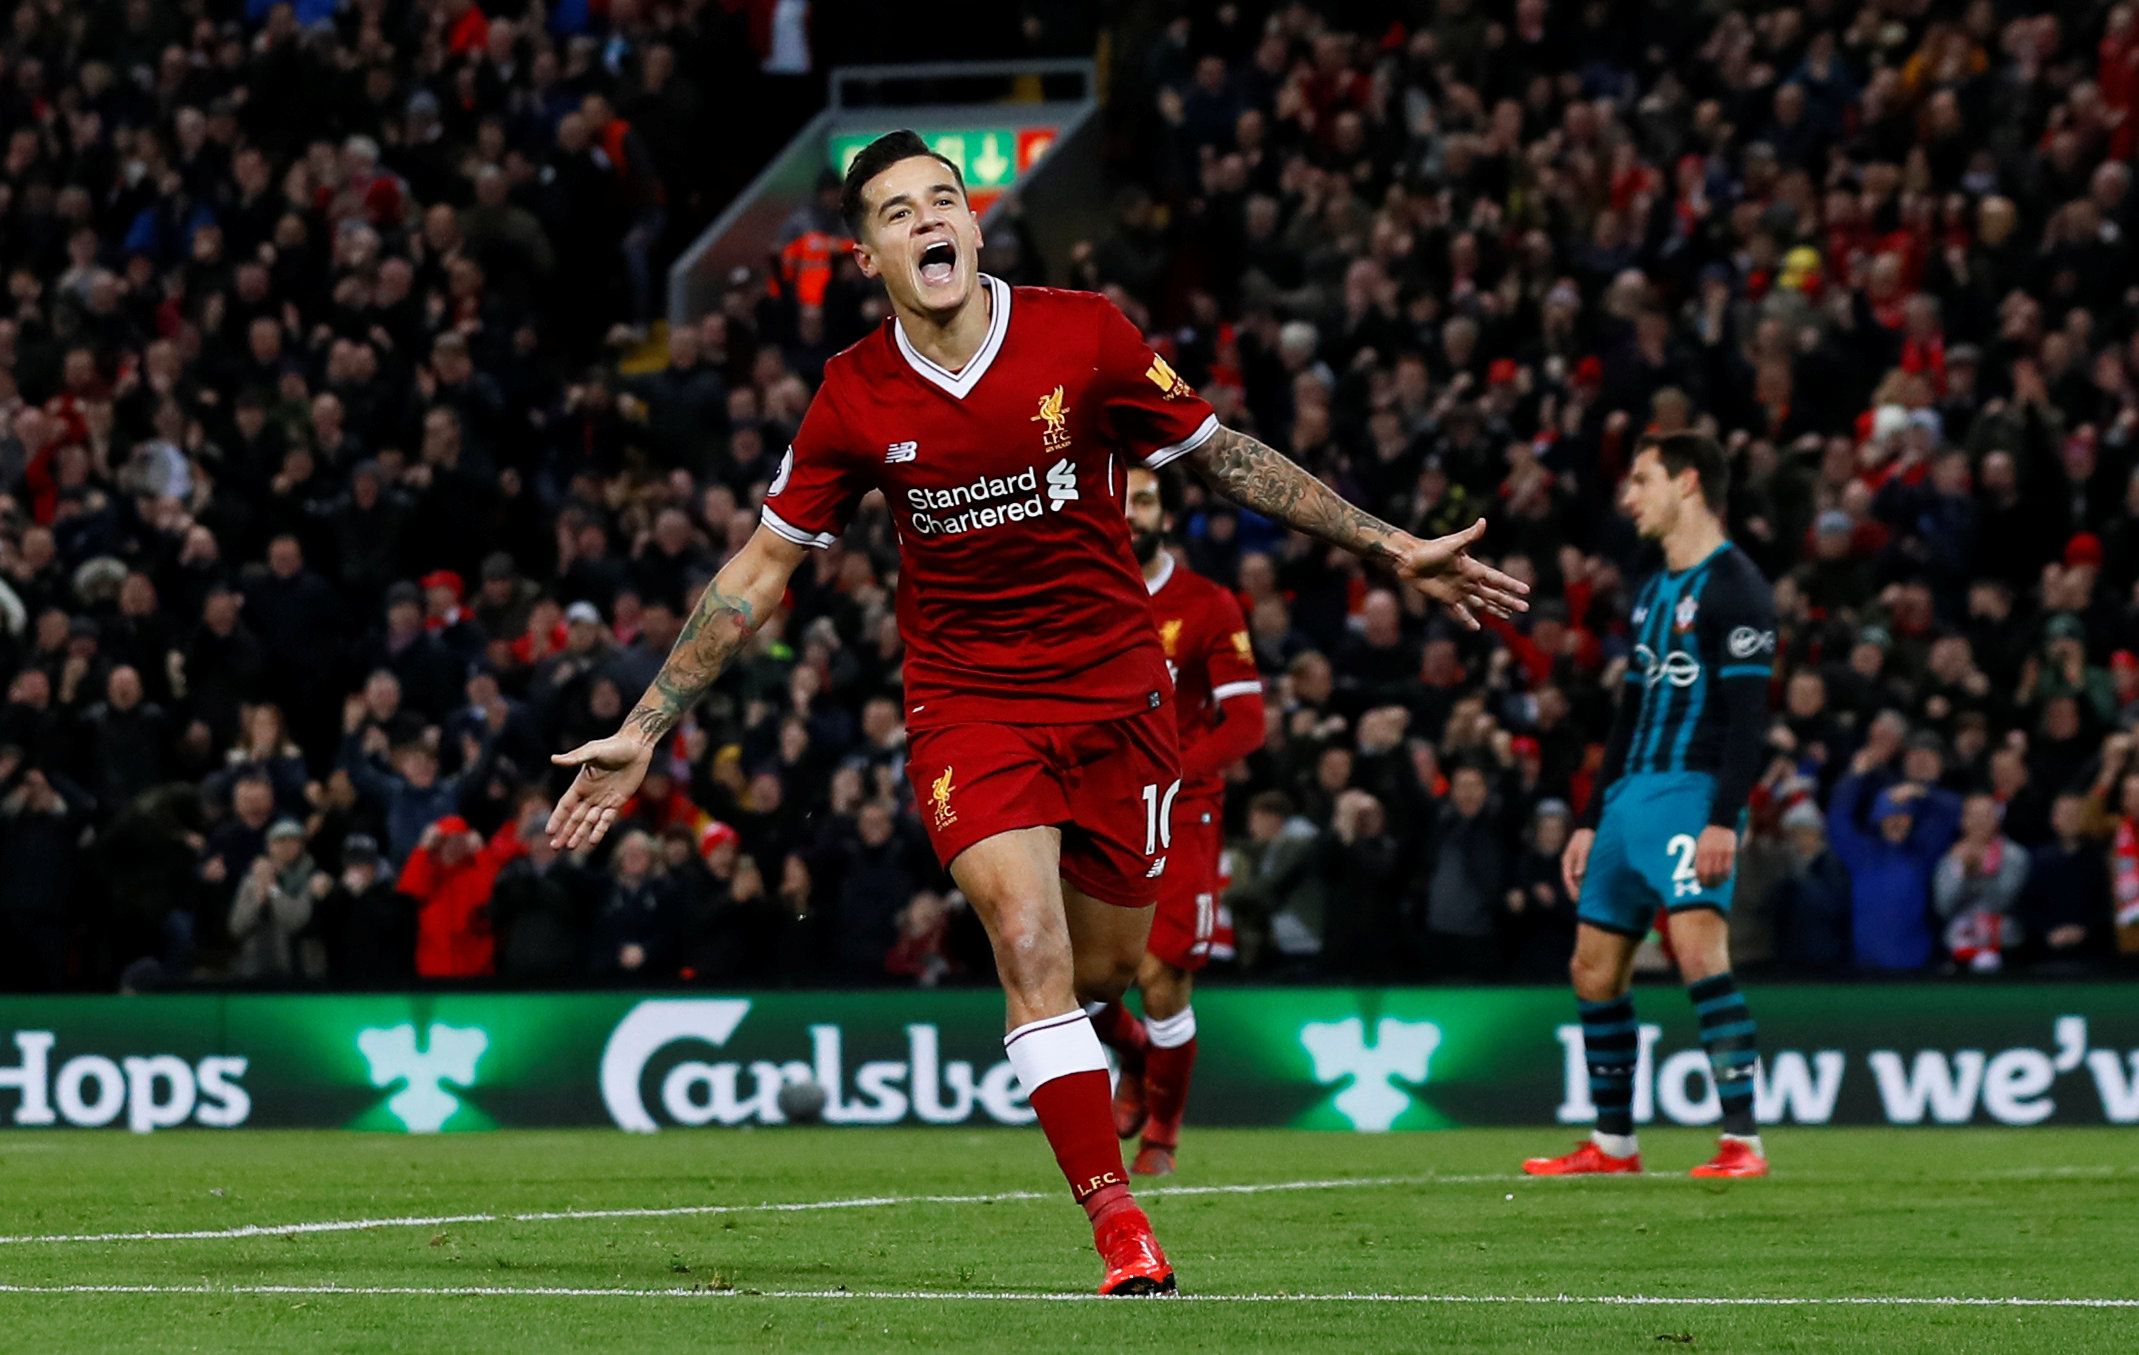 Soccer Football - Premier League - Liverpool vs Southampton - Anfield, Liverpool, Britain - November 18, 2017   Liverpool's Philippe Coutinho celebrates after scoring their third goal    Action Images via Reuters/Jason Cairnduff    EDITORIAL USE ONLY. No use with unauthorized audio, video, data, fixture lists, club/league logos or 